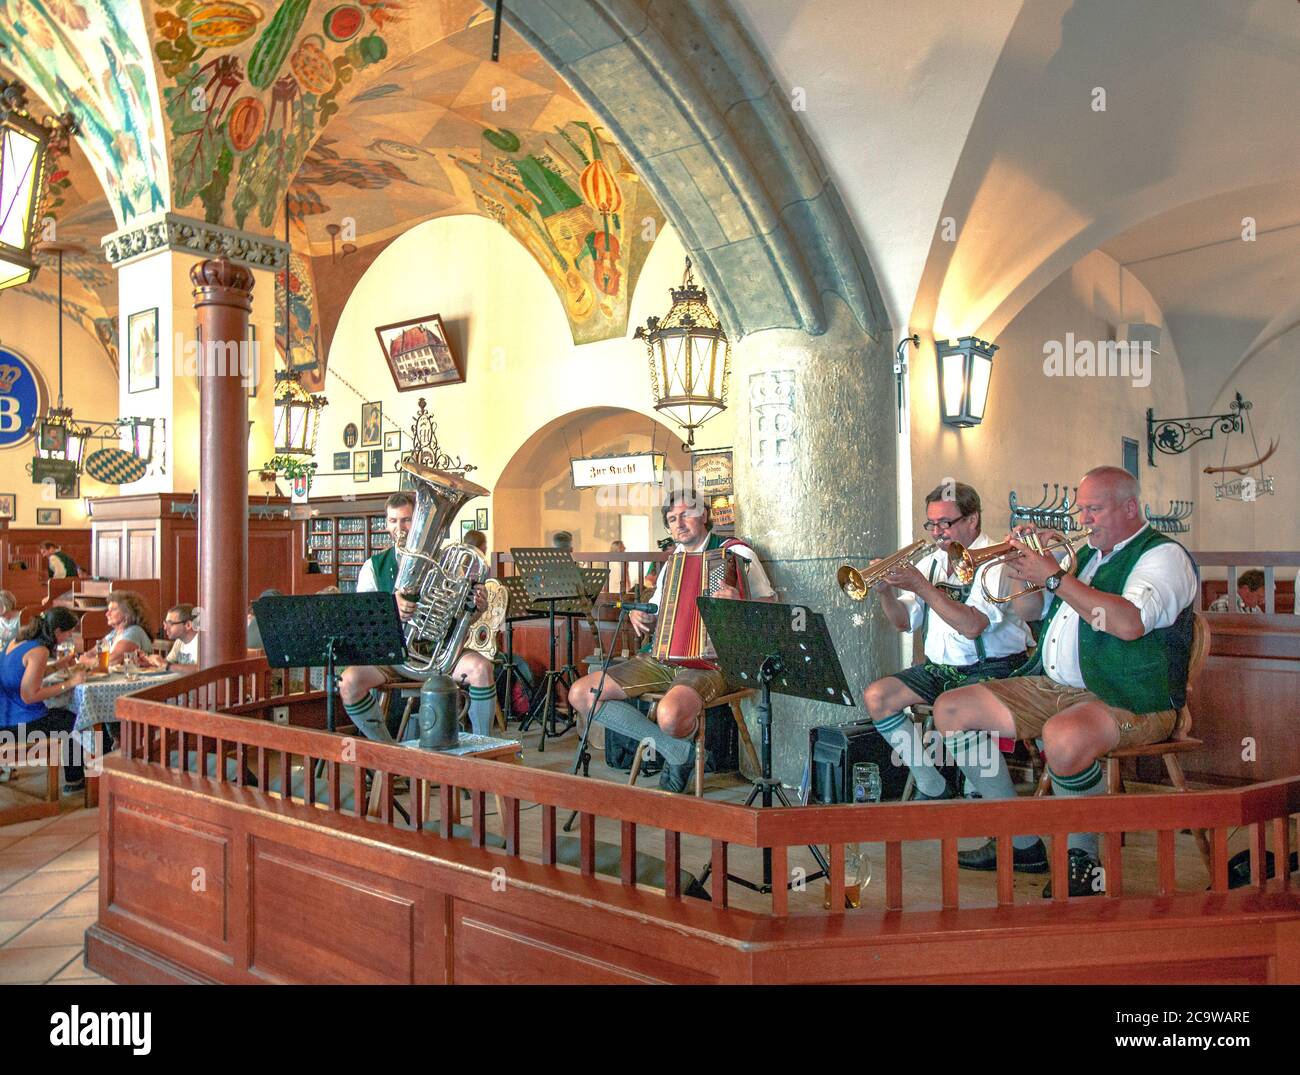 Costumed in traditional Bavarian liederhosen, the oompah band at Munich's Hofbrauhaus entertains diners with typical Bavarian music. Stock Photo